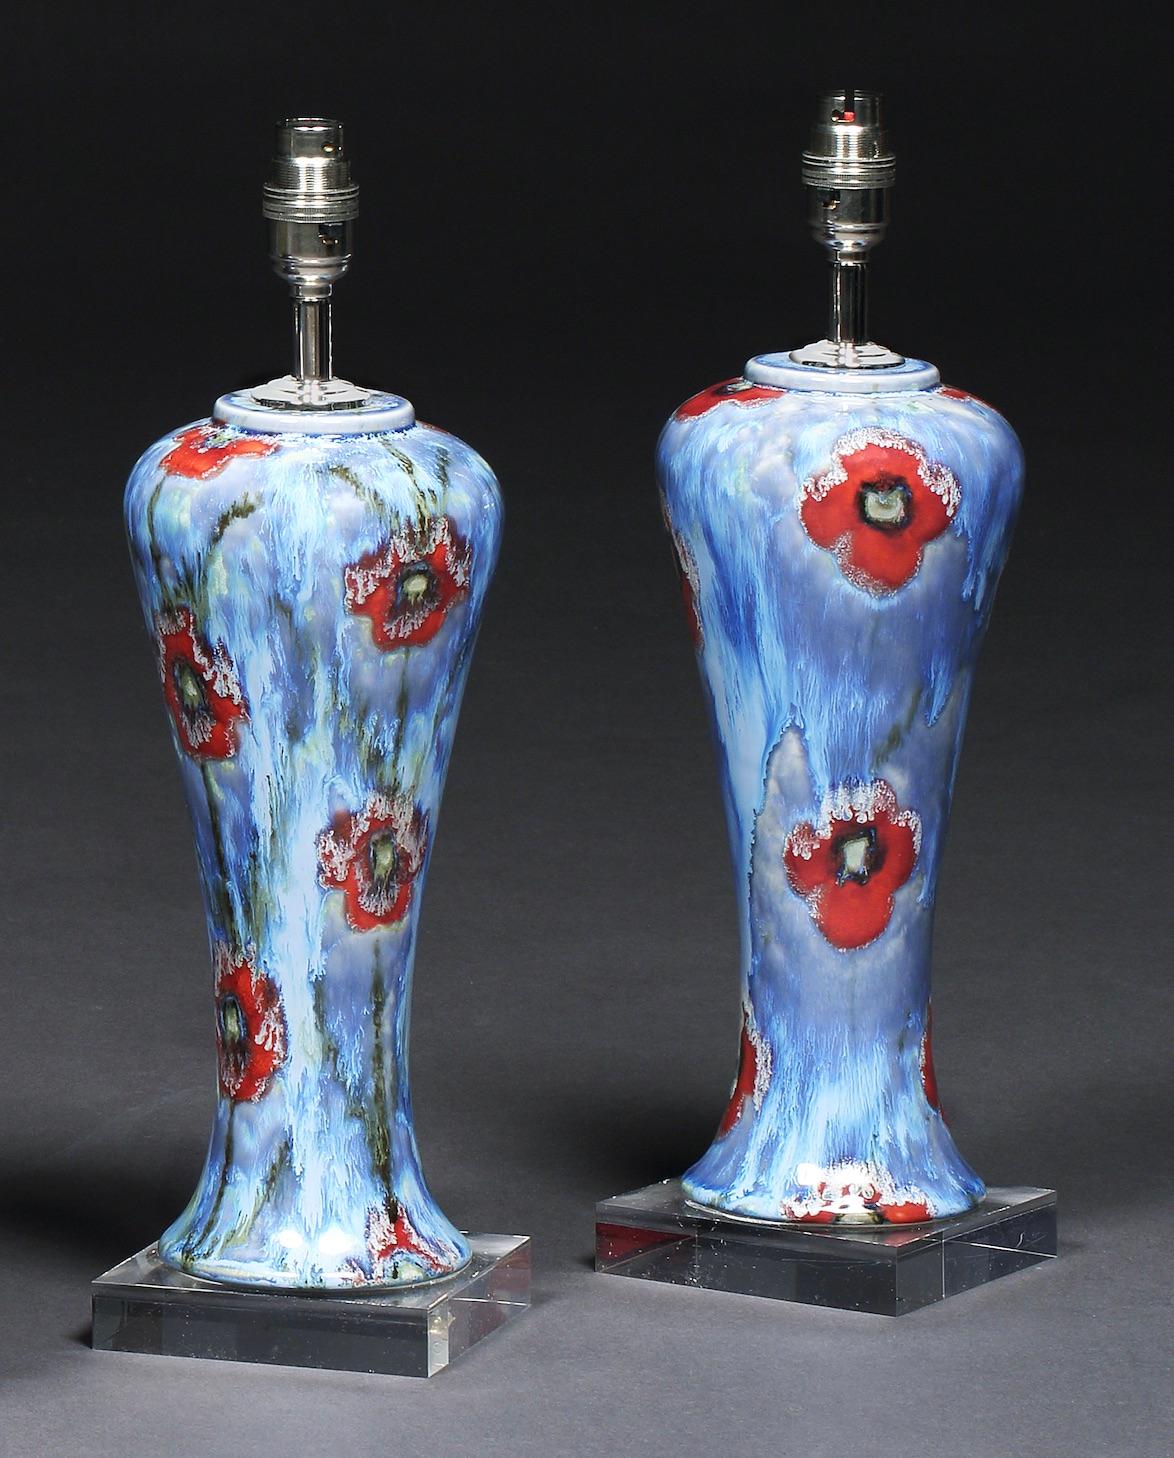 A pair of Cobridge, poppy & ice pattern, hand painted, table lamps on Perspex bases. Measures: 16 1/2” 42cm high to top of chrome fitting

One of Cobridge Pottery’s most popular patterns, designed by artist Anita Harris, leading designer at